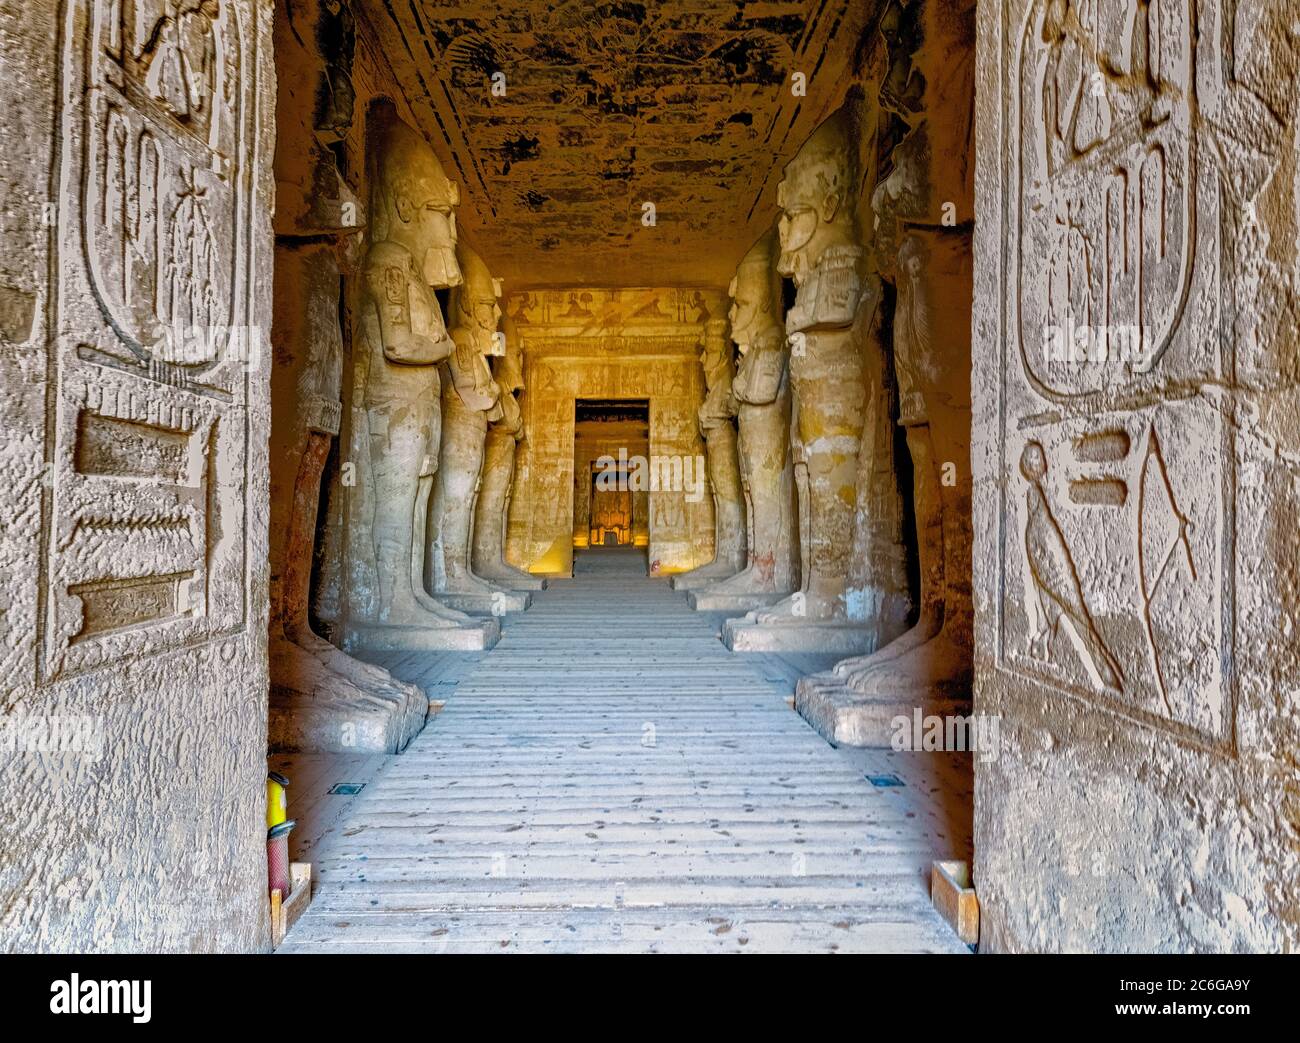 The hypostyle hall of the Great Temple at Abu Simbel with Osiris pillars of Ramsses II Stock Photo